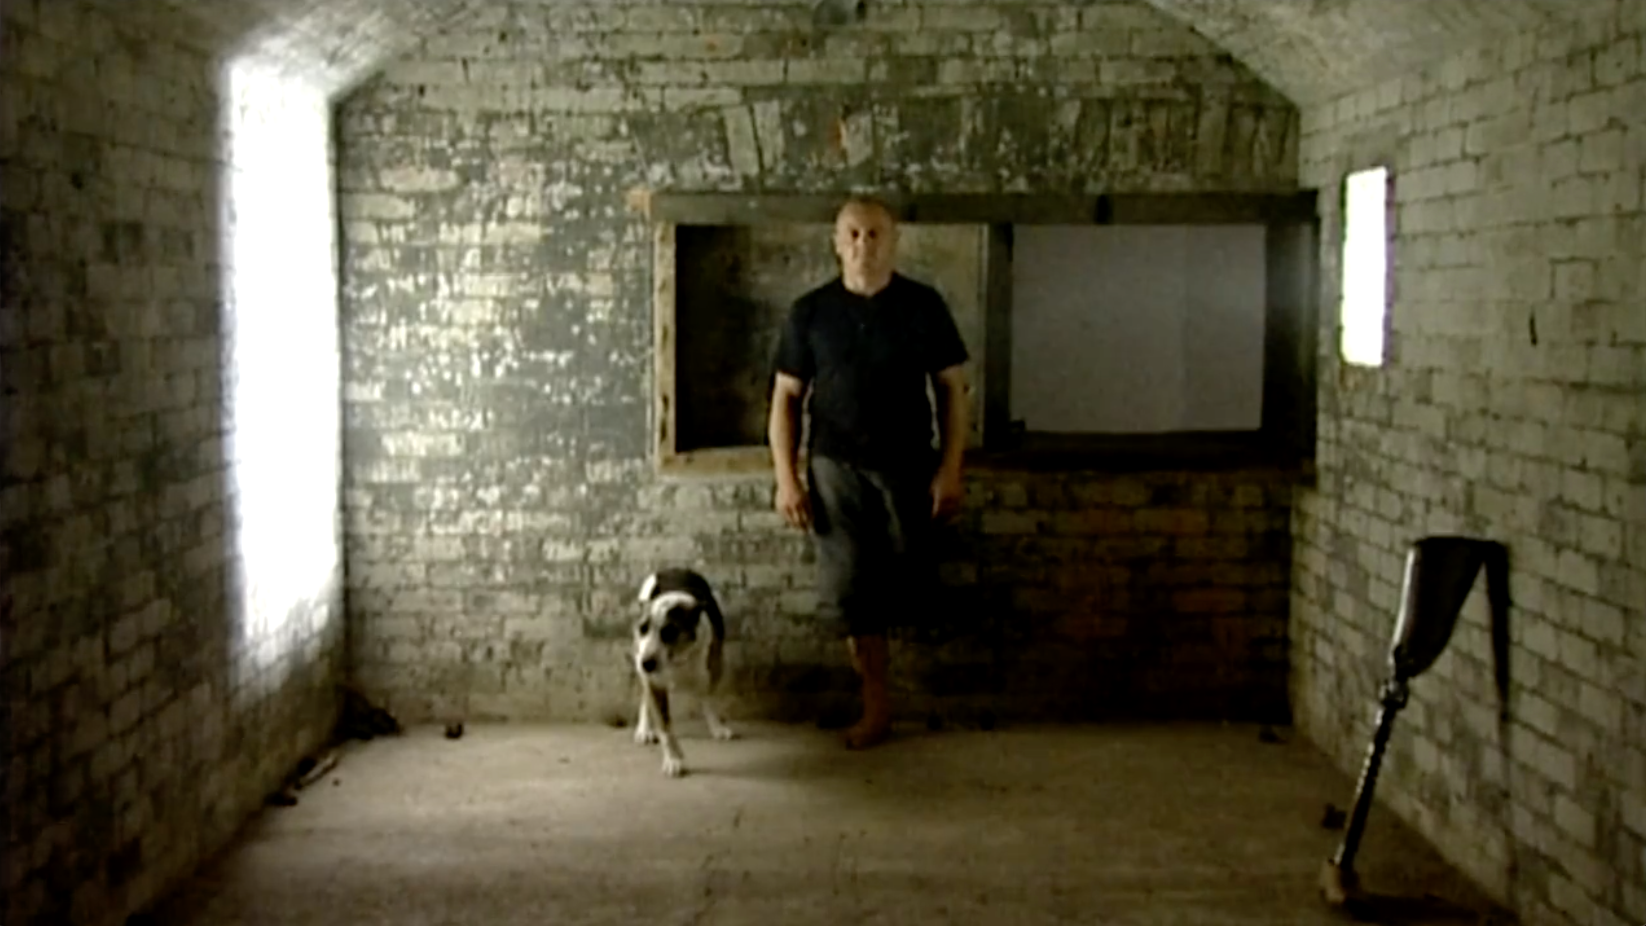 A Man in the back of a world war 2 bunker, next to a three legged dog. The room is brick and dimly lit. They are facing the camera.